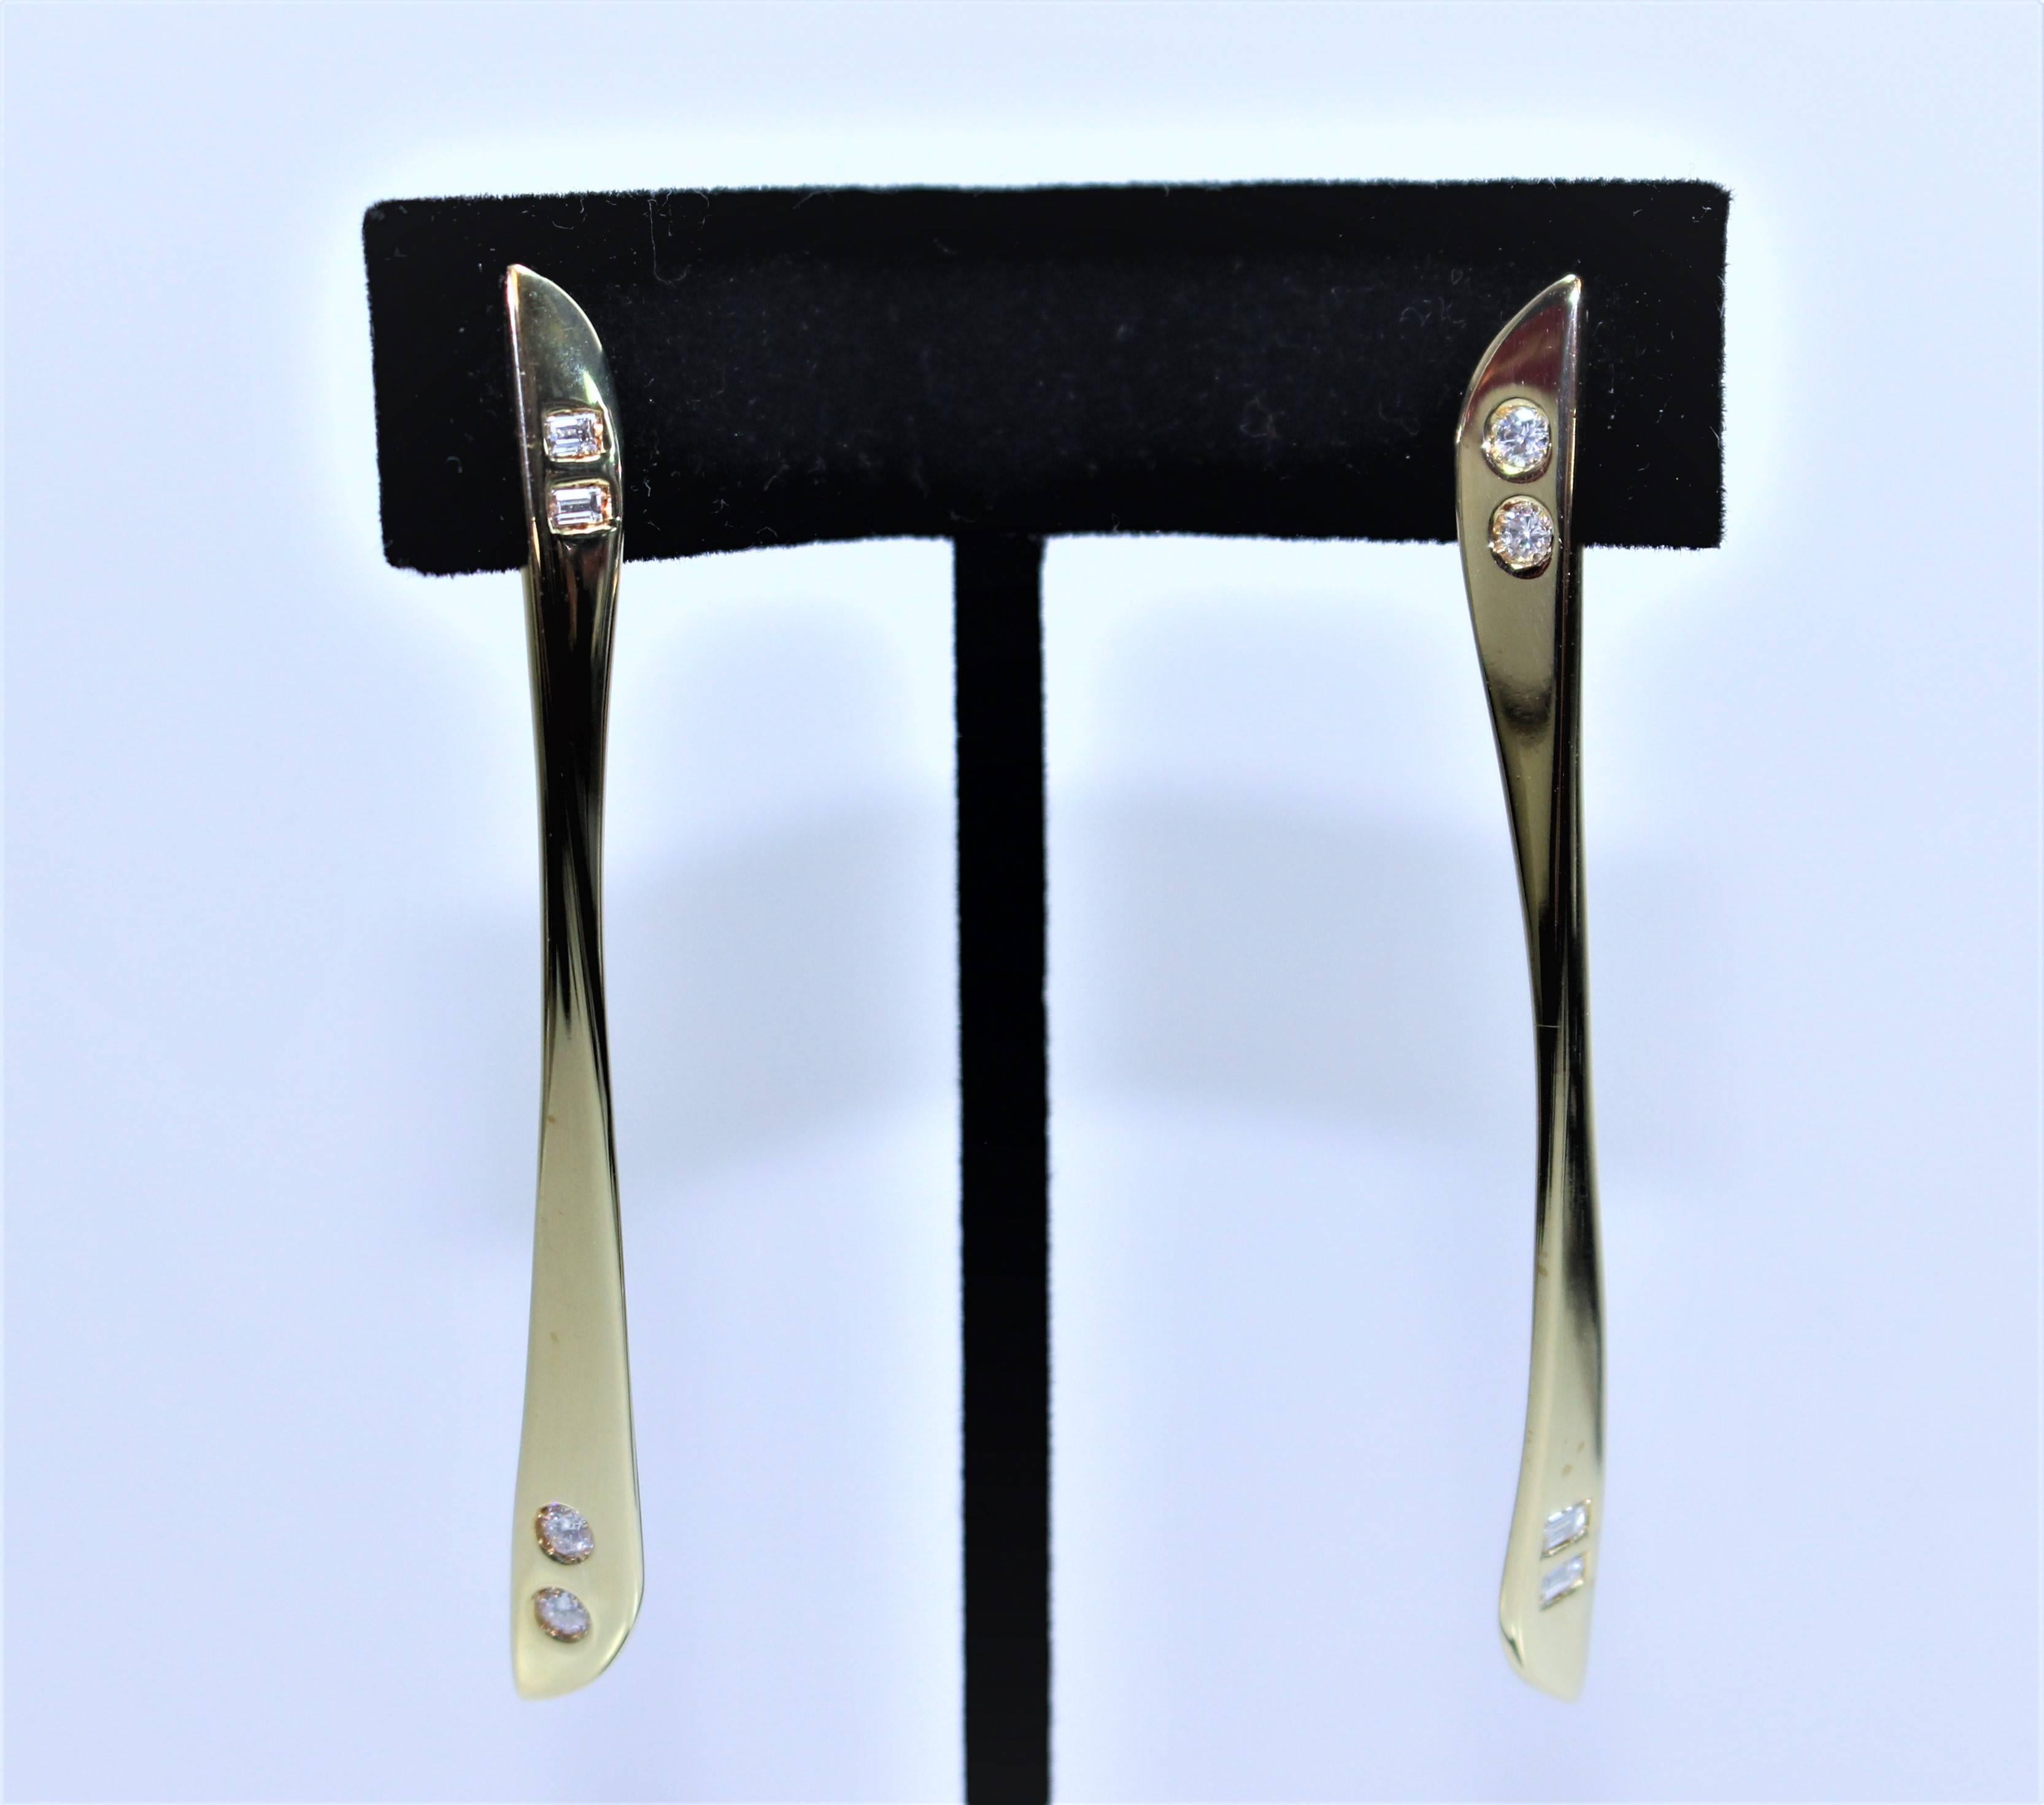 These earrings are composed of 18KT Gold and feature a sleek streamline design with inset diamonds. Made in Italy, circa 1960's. There is a post back.

Specs:
18 KT Yellow Gold
Diamonds: 
4- 0.10 Brilliant Cut Diamonds (Approximate carat